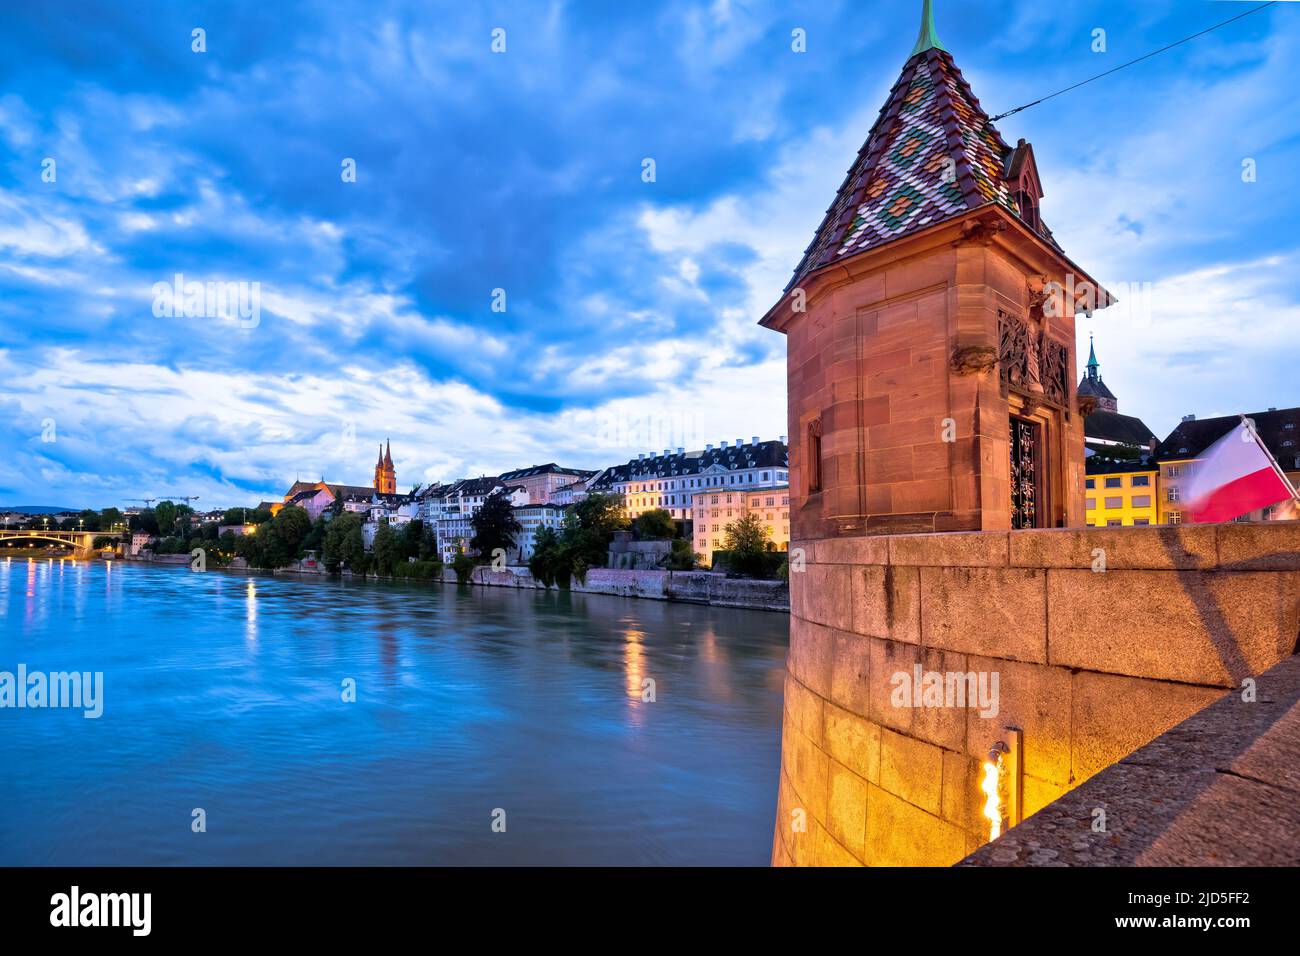 Basel middle bridge and historic architecture evening view, Switzerland Stock Photo